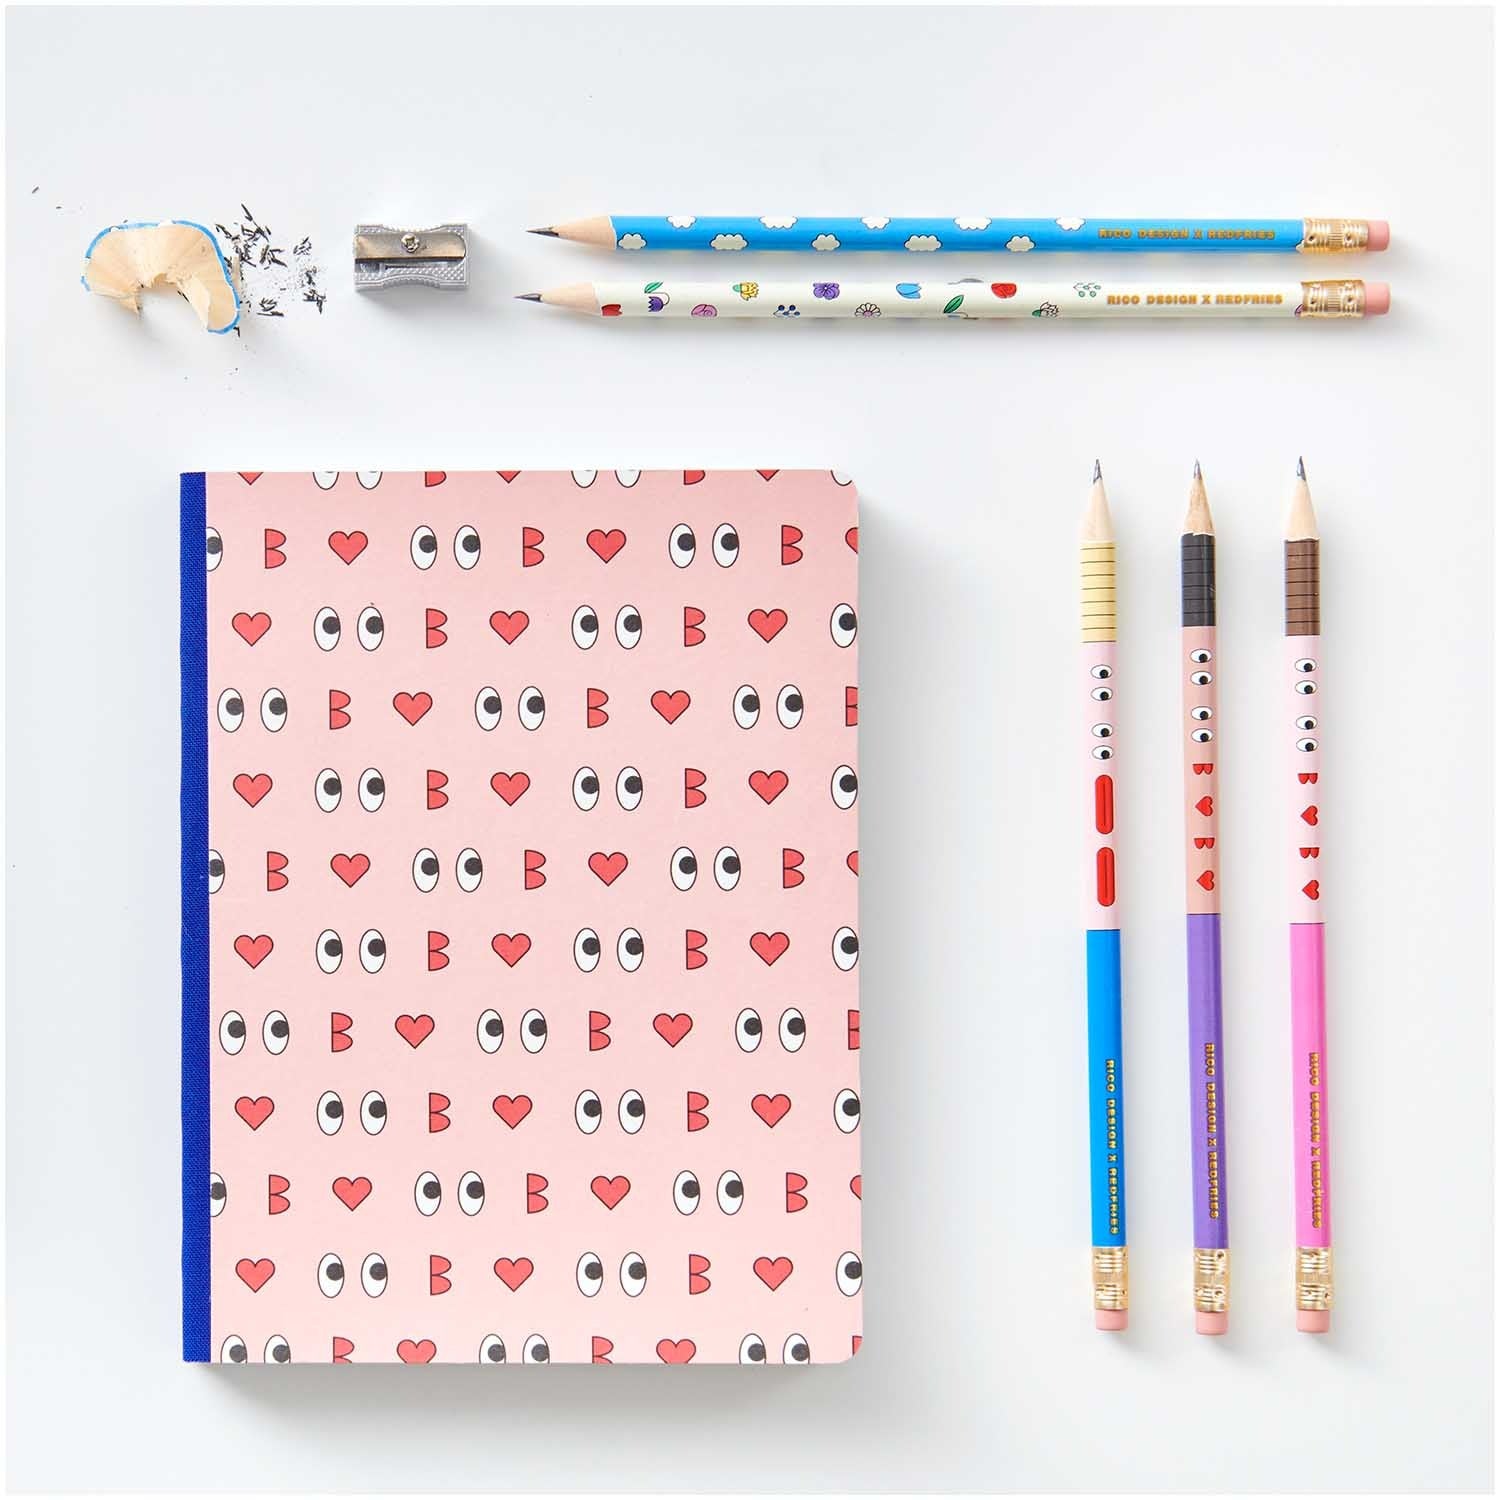 Paper Poetry Pencil set - Eye Candy